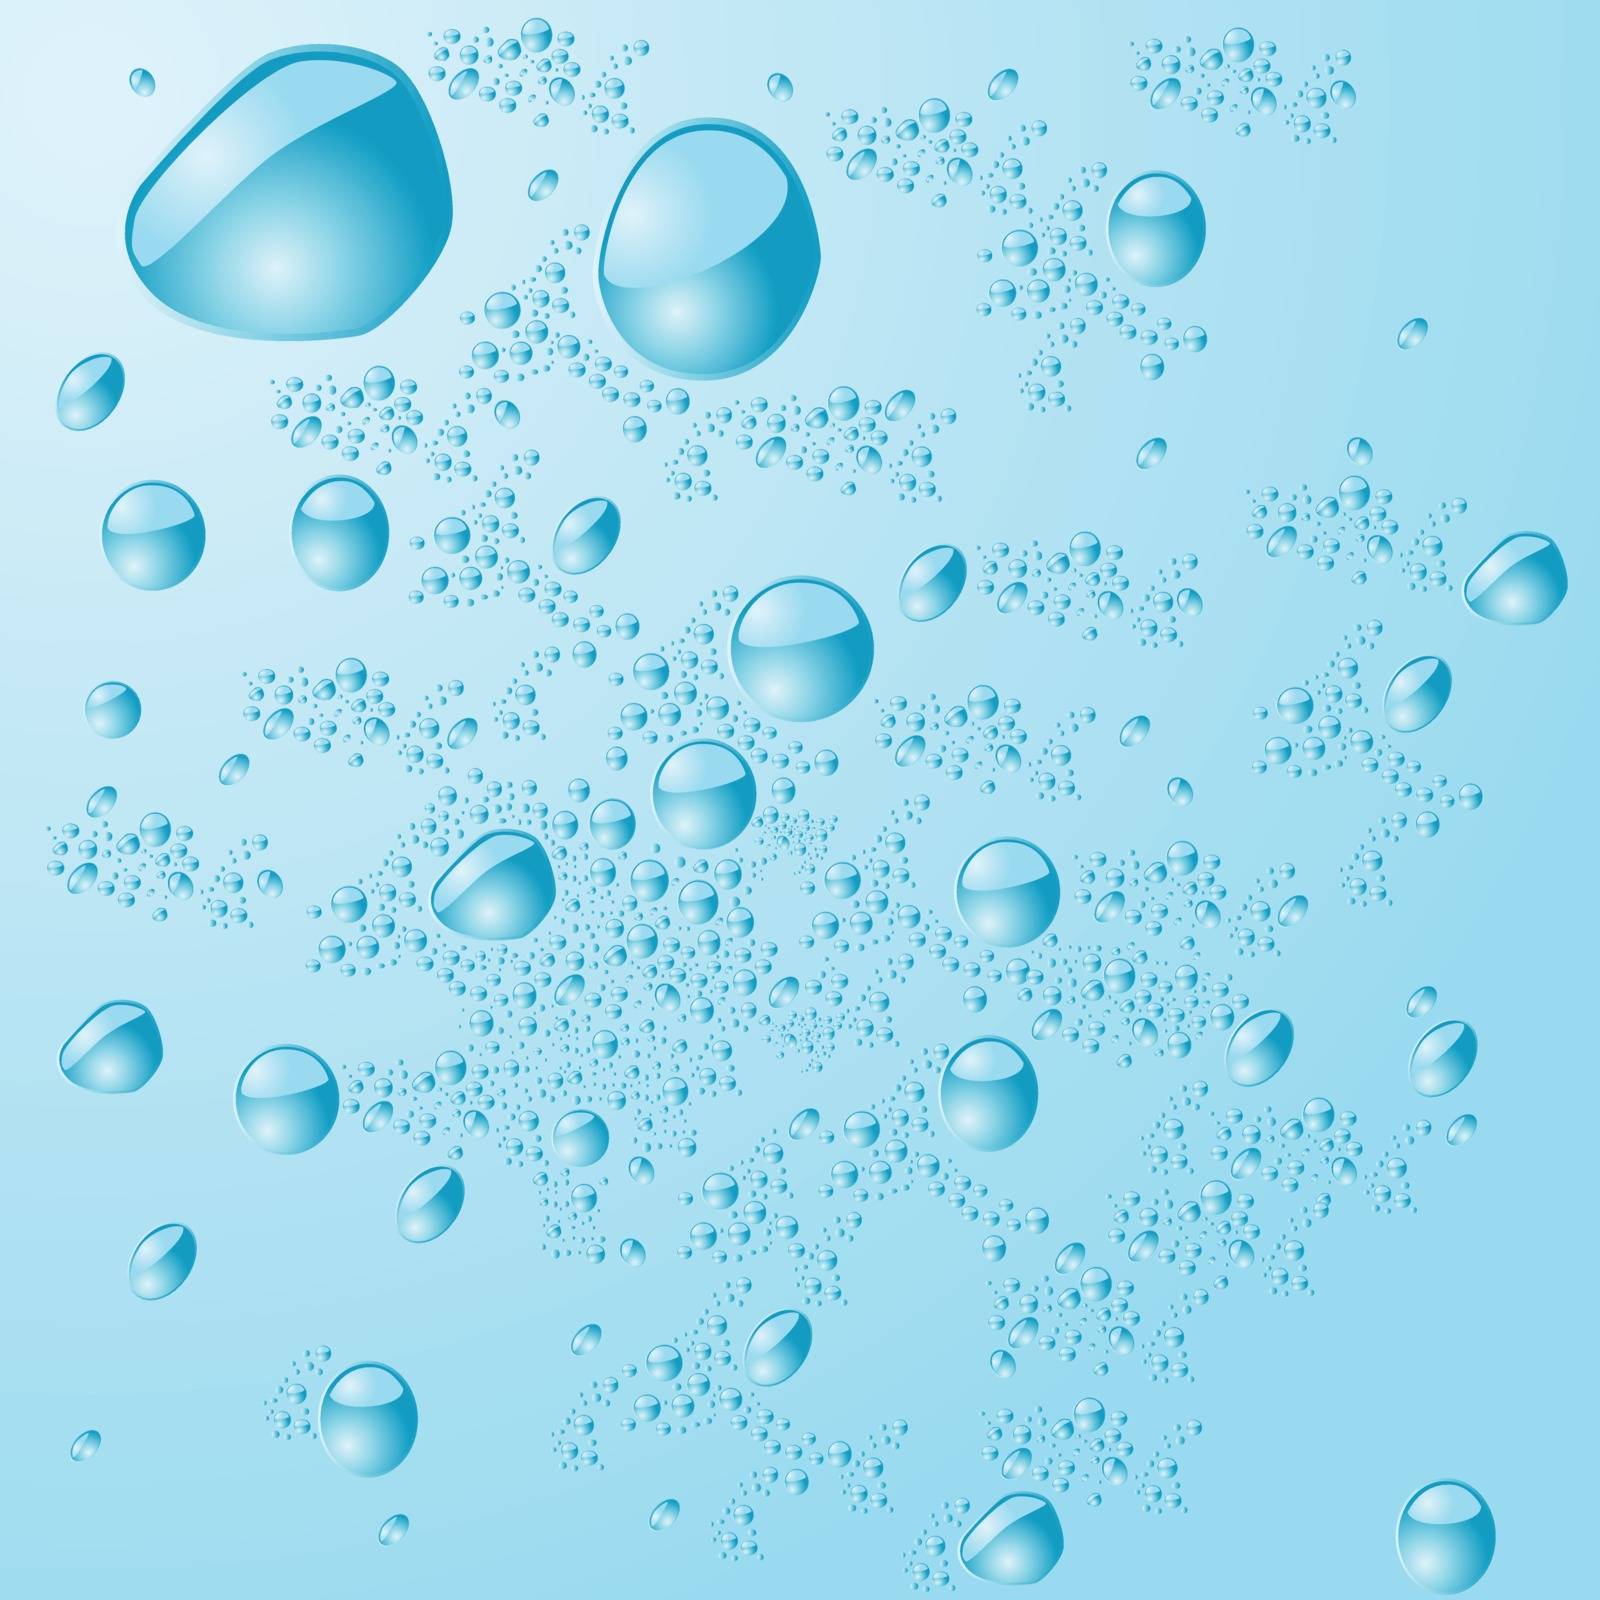 Illustration of a blue surface with water drops on it